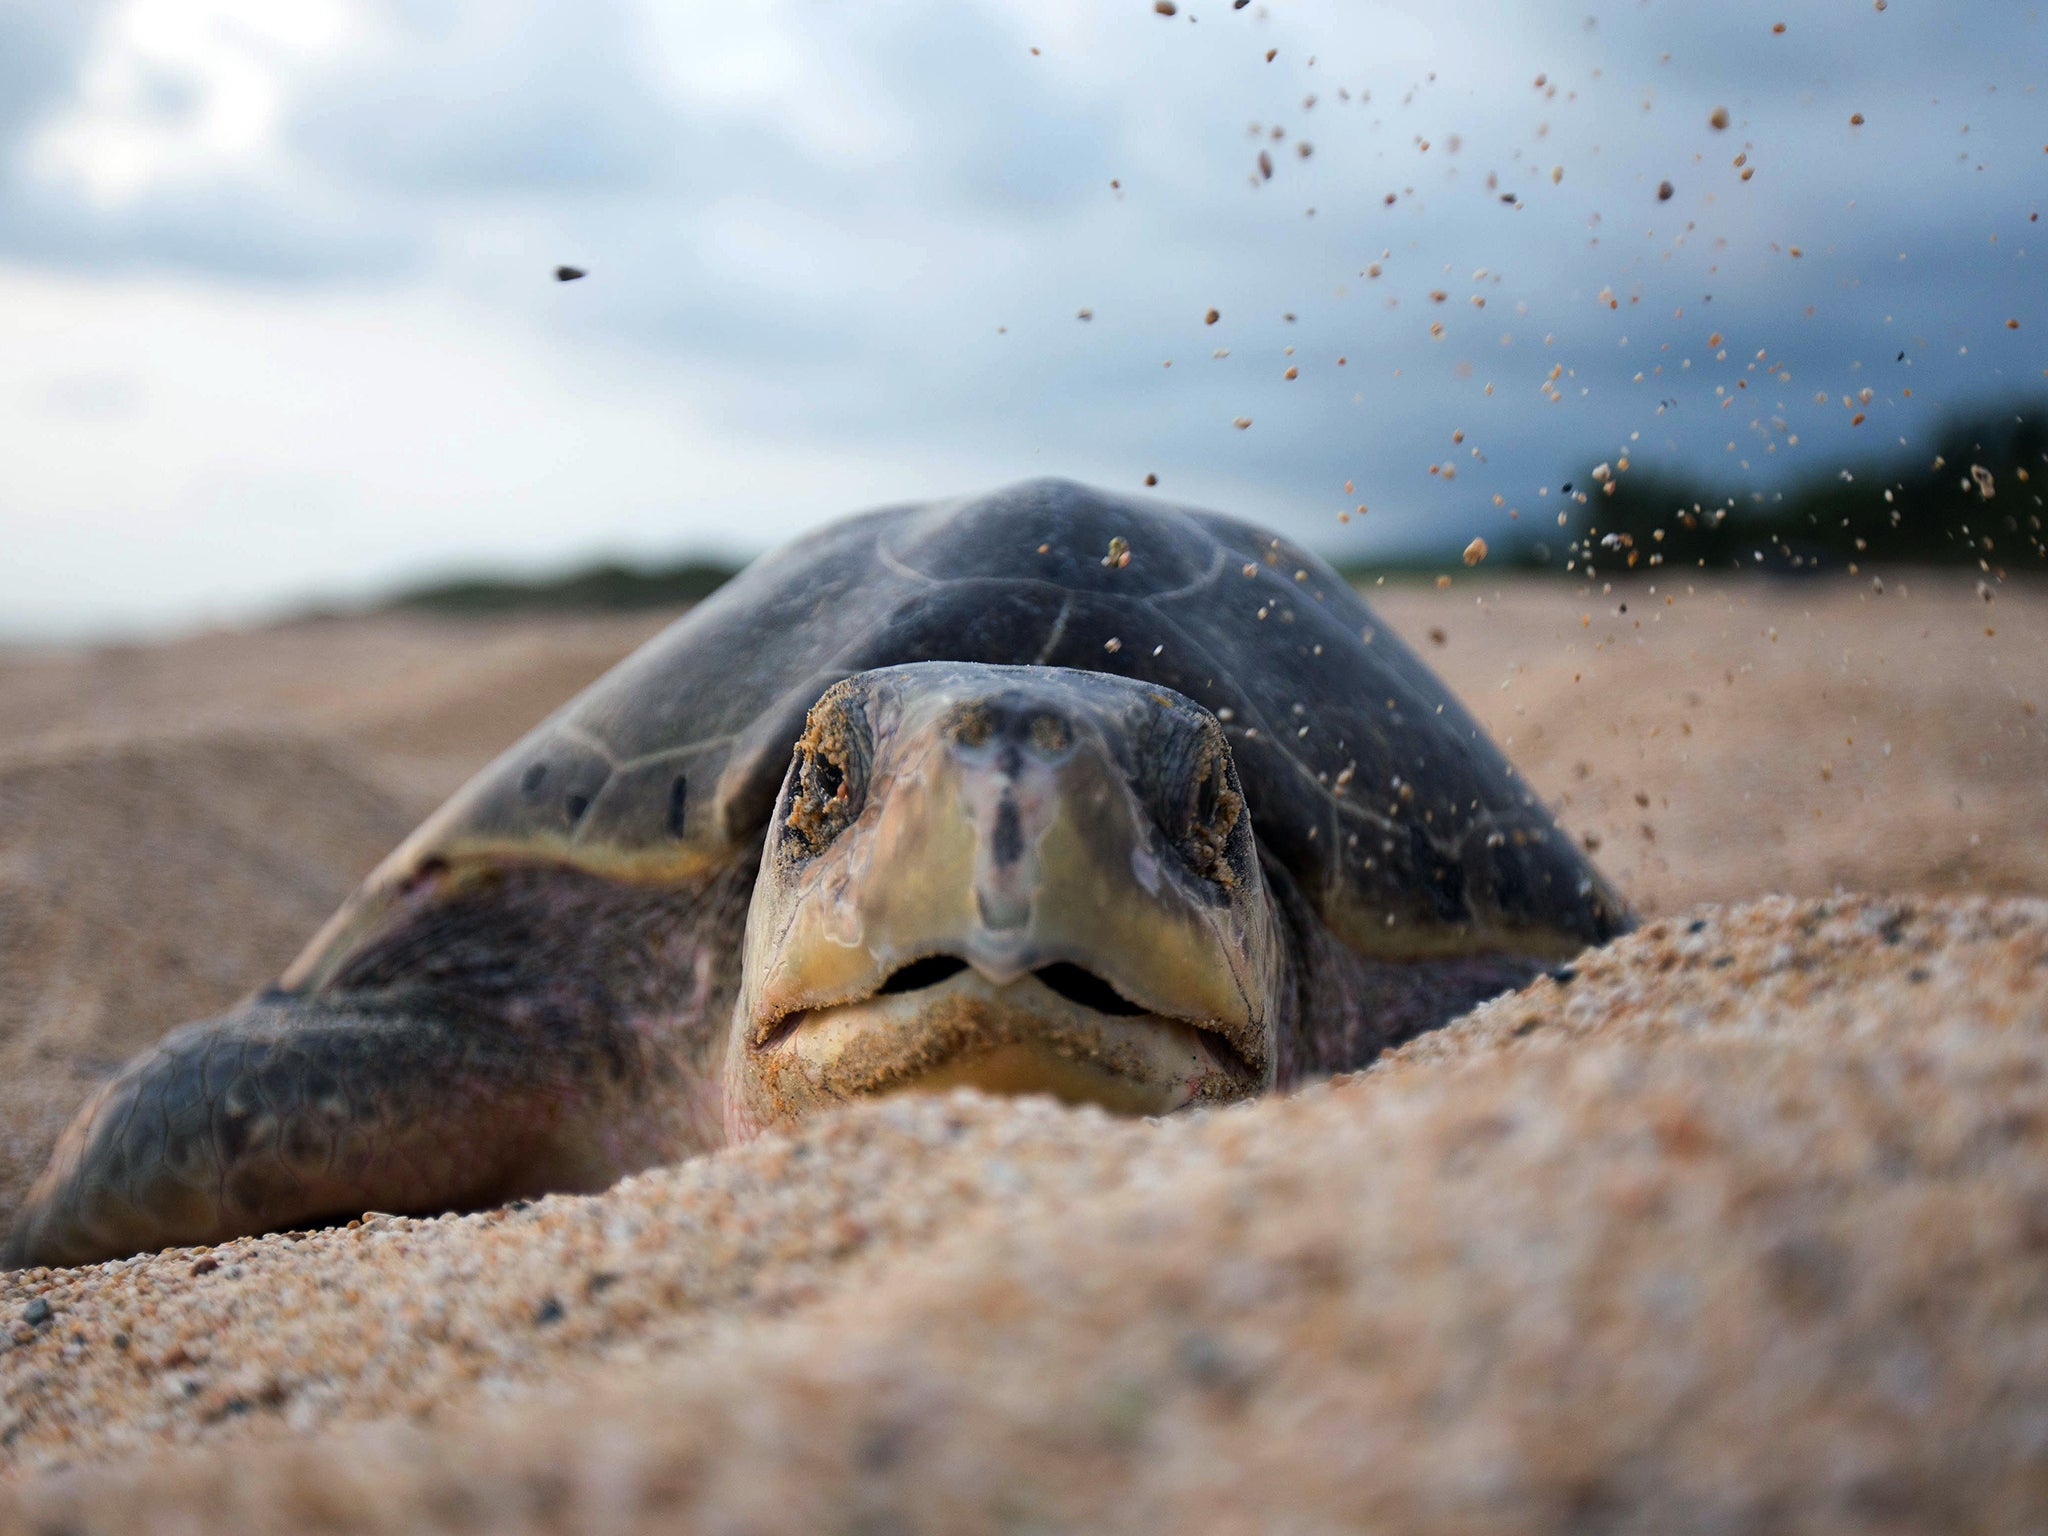 Results of a new study indicate that approximately 52 per cent of turtles worldwide have eaten debris, either dumped in the oceans by humans or swept out to sea